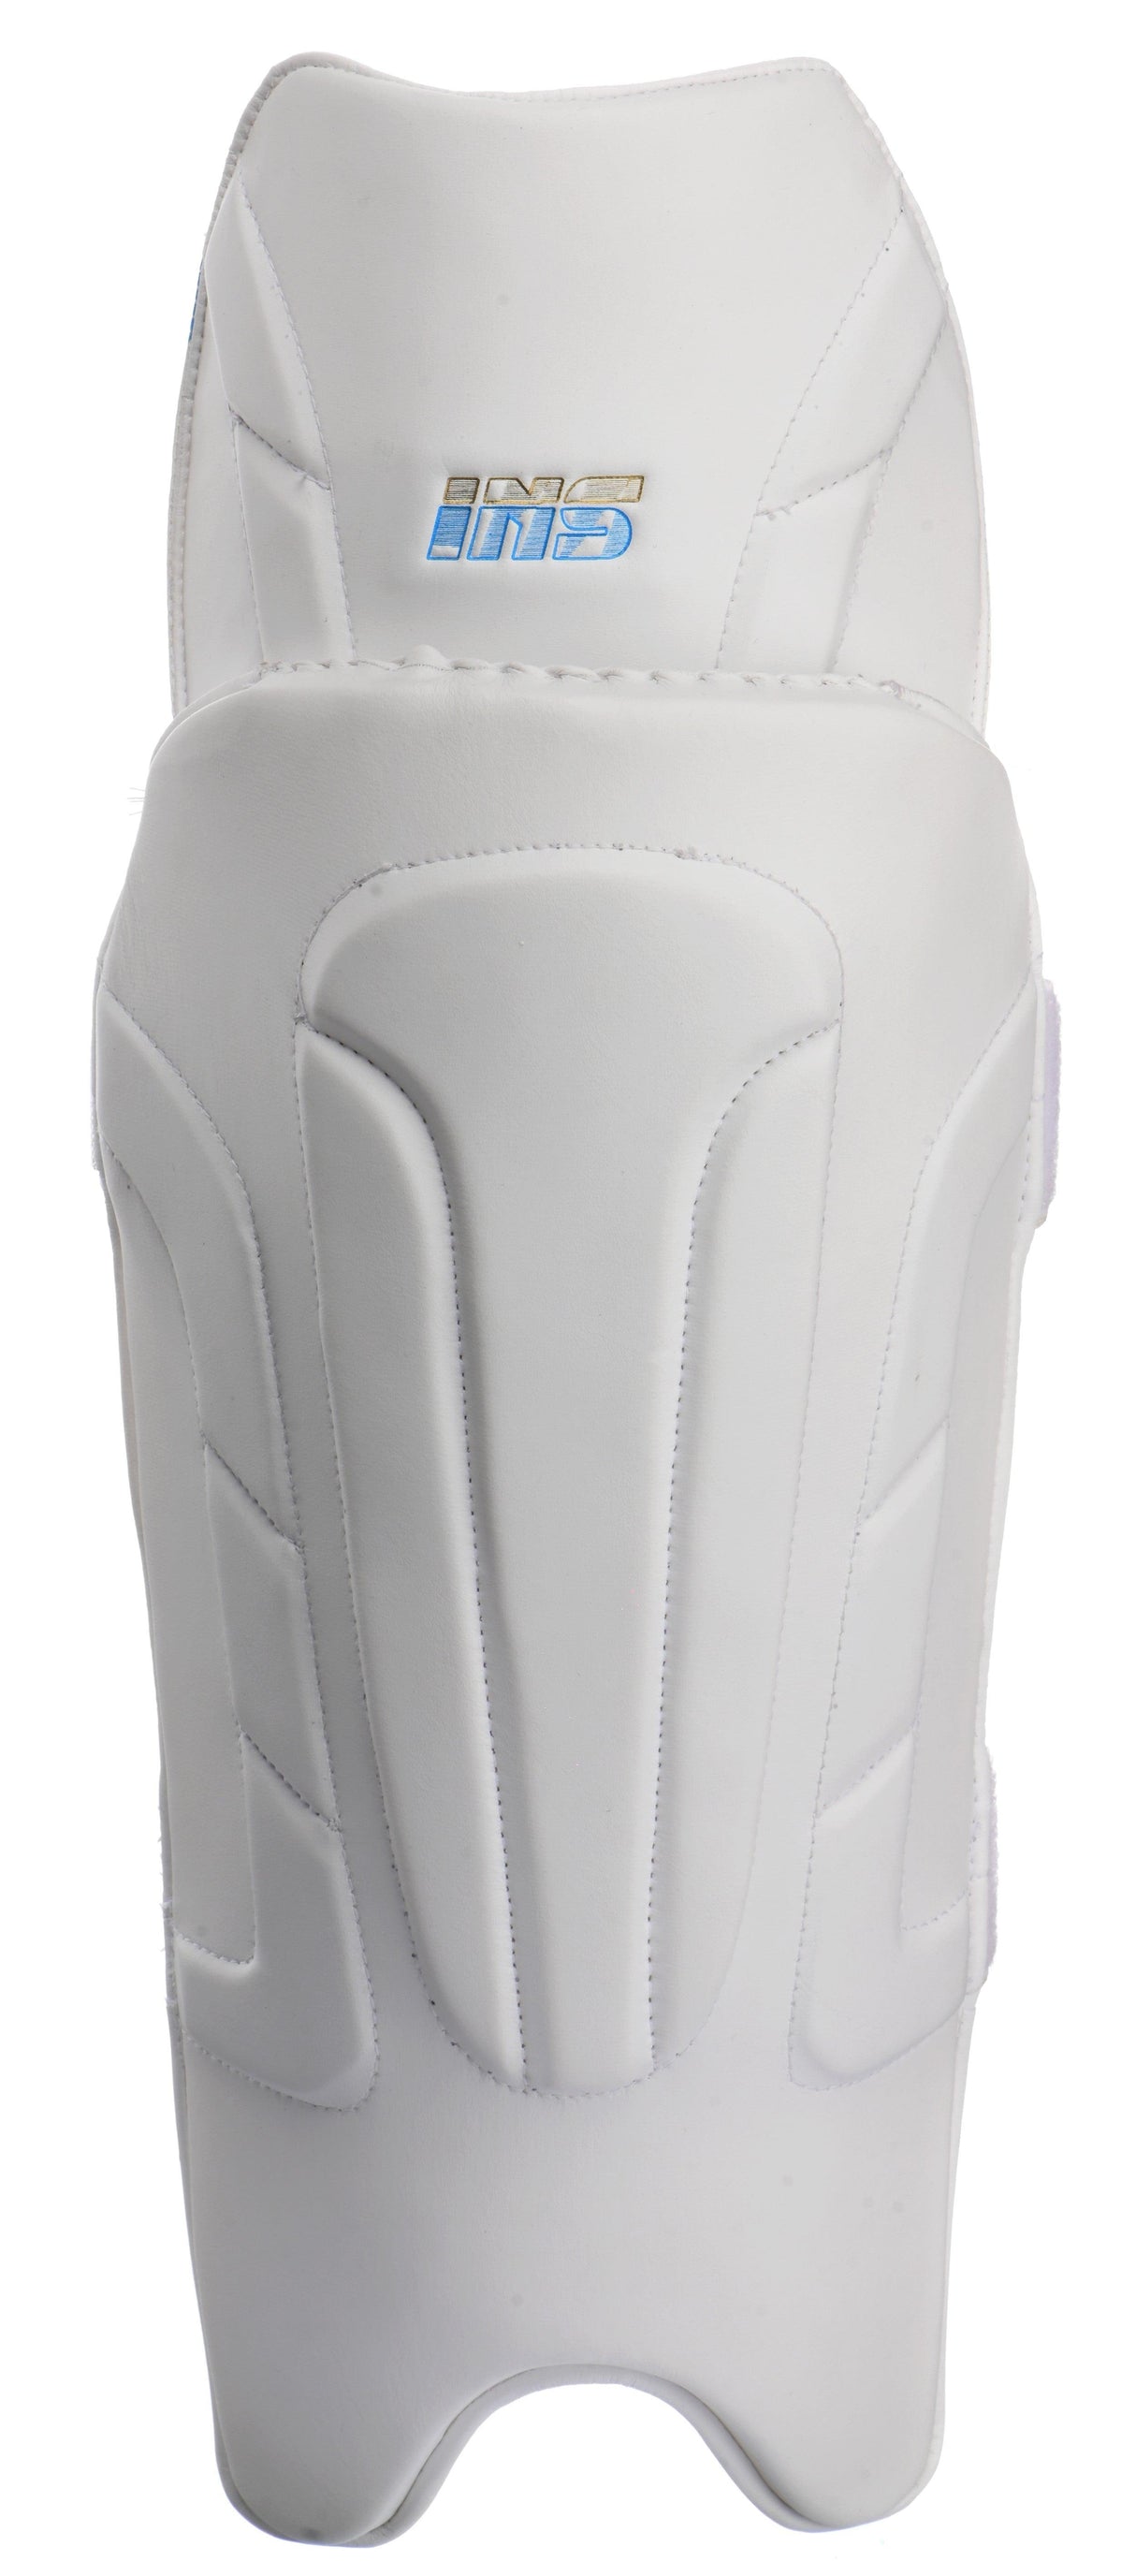 INS Ethereal Wicket-Keeping Pads - Shoply